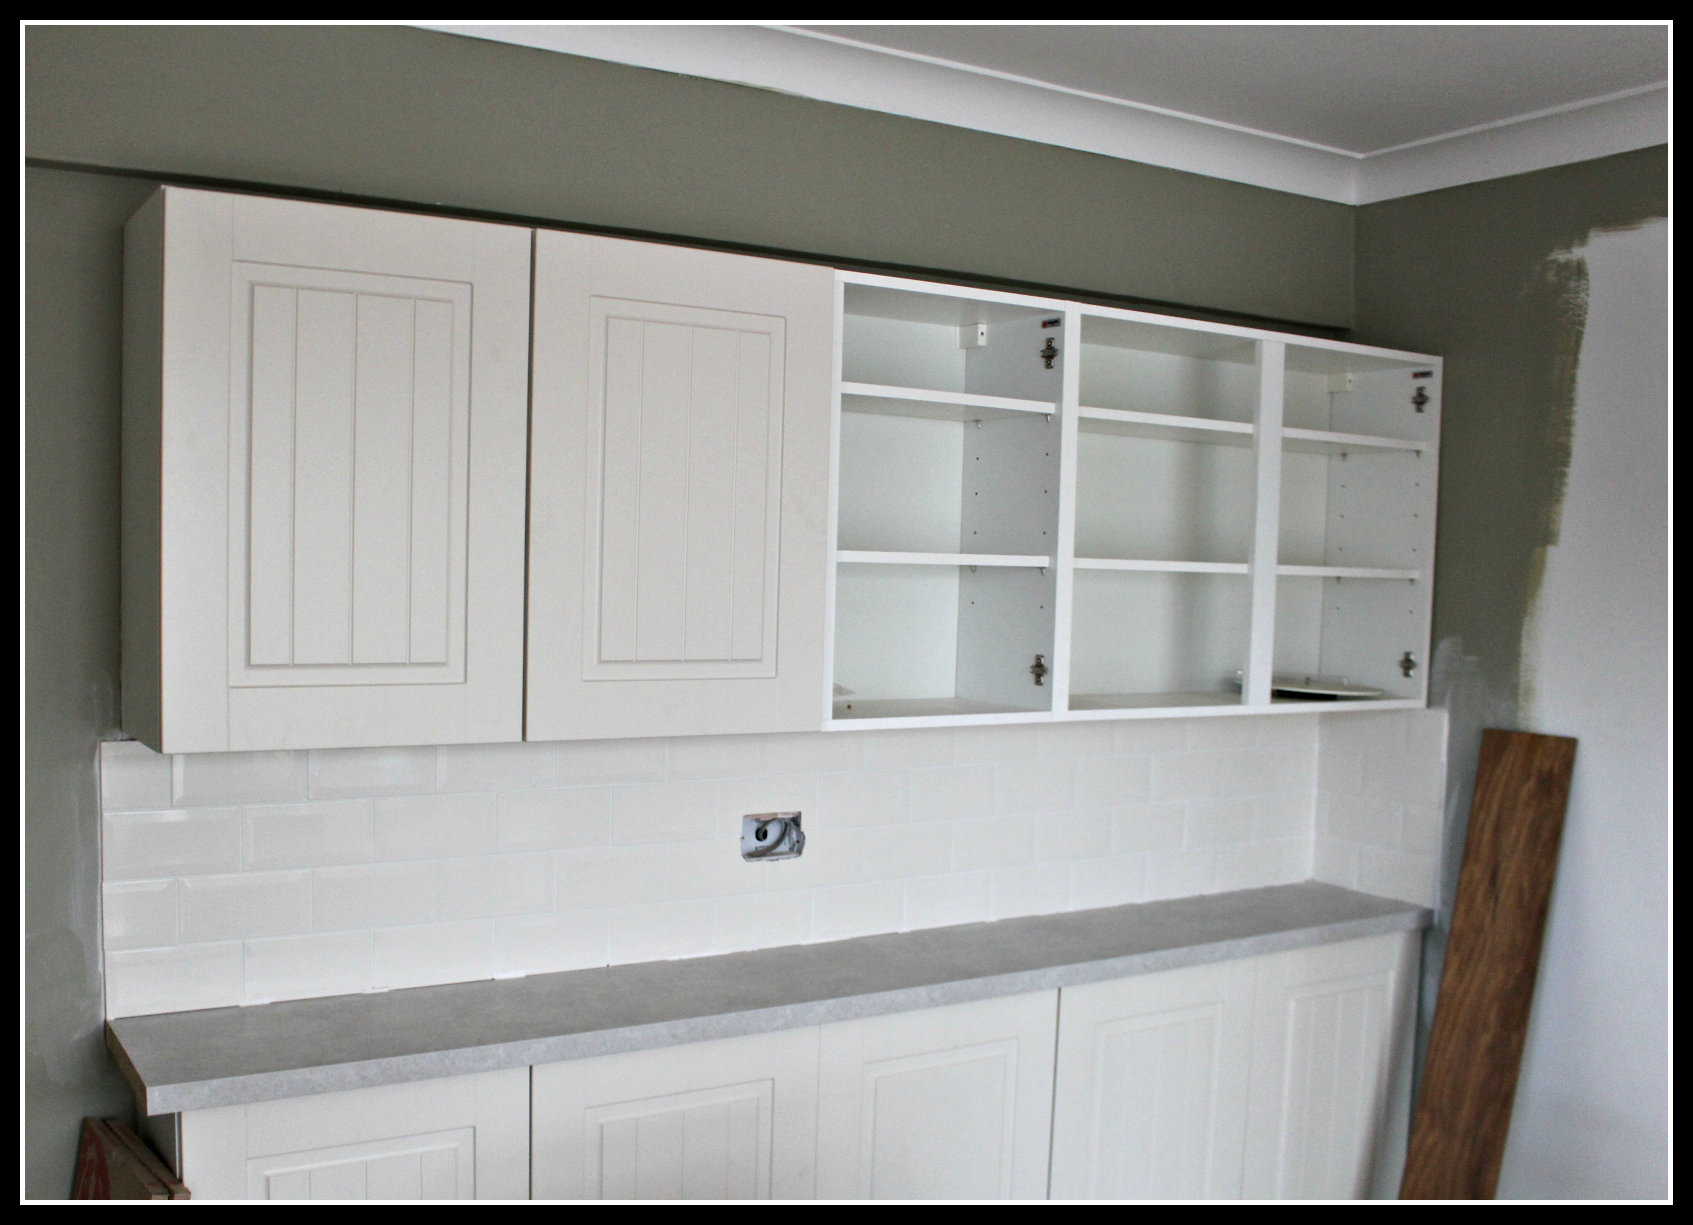 wall mounted units, new kitchen, family home, open plan kitchen diner, 